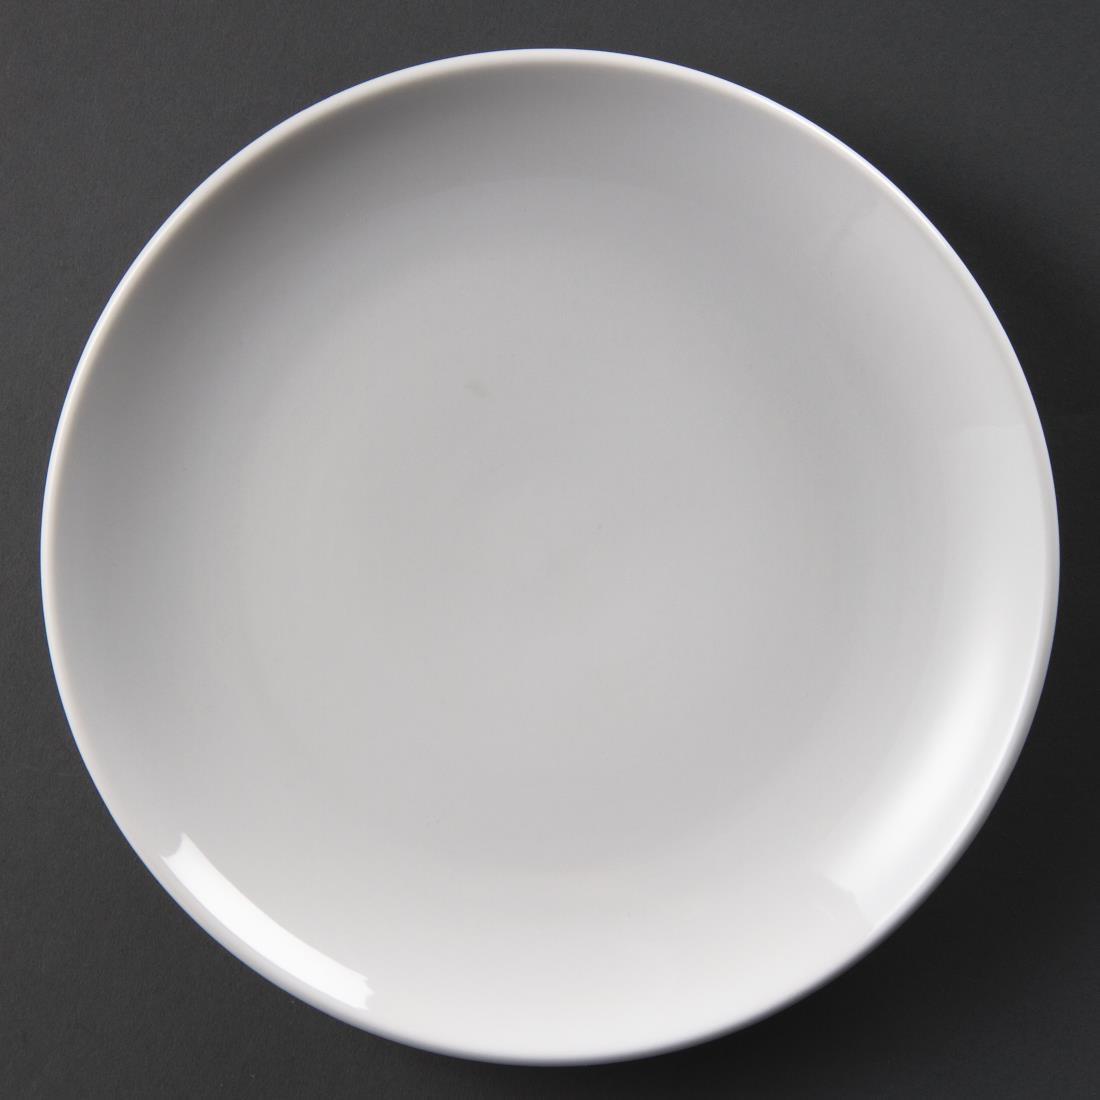 Olympia Whiteware Coupe Plates 230mm (Pack of 12) - U078  - 1